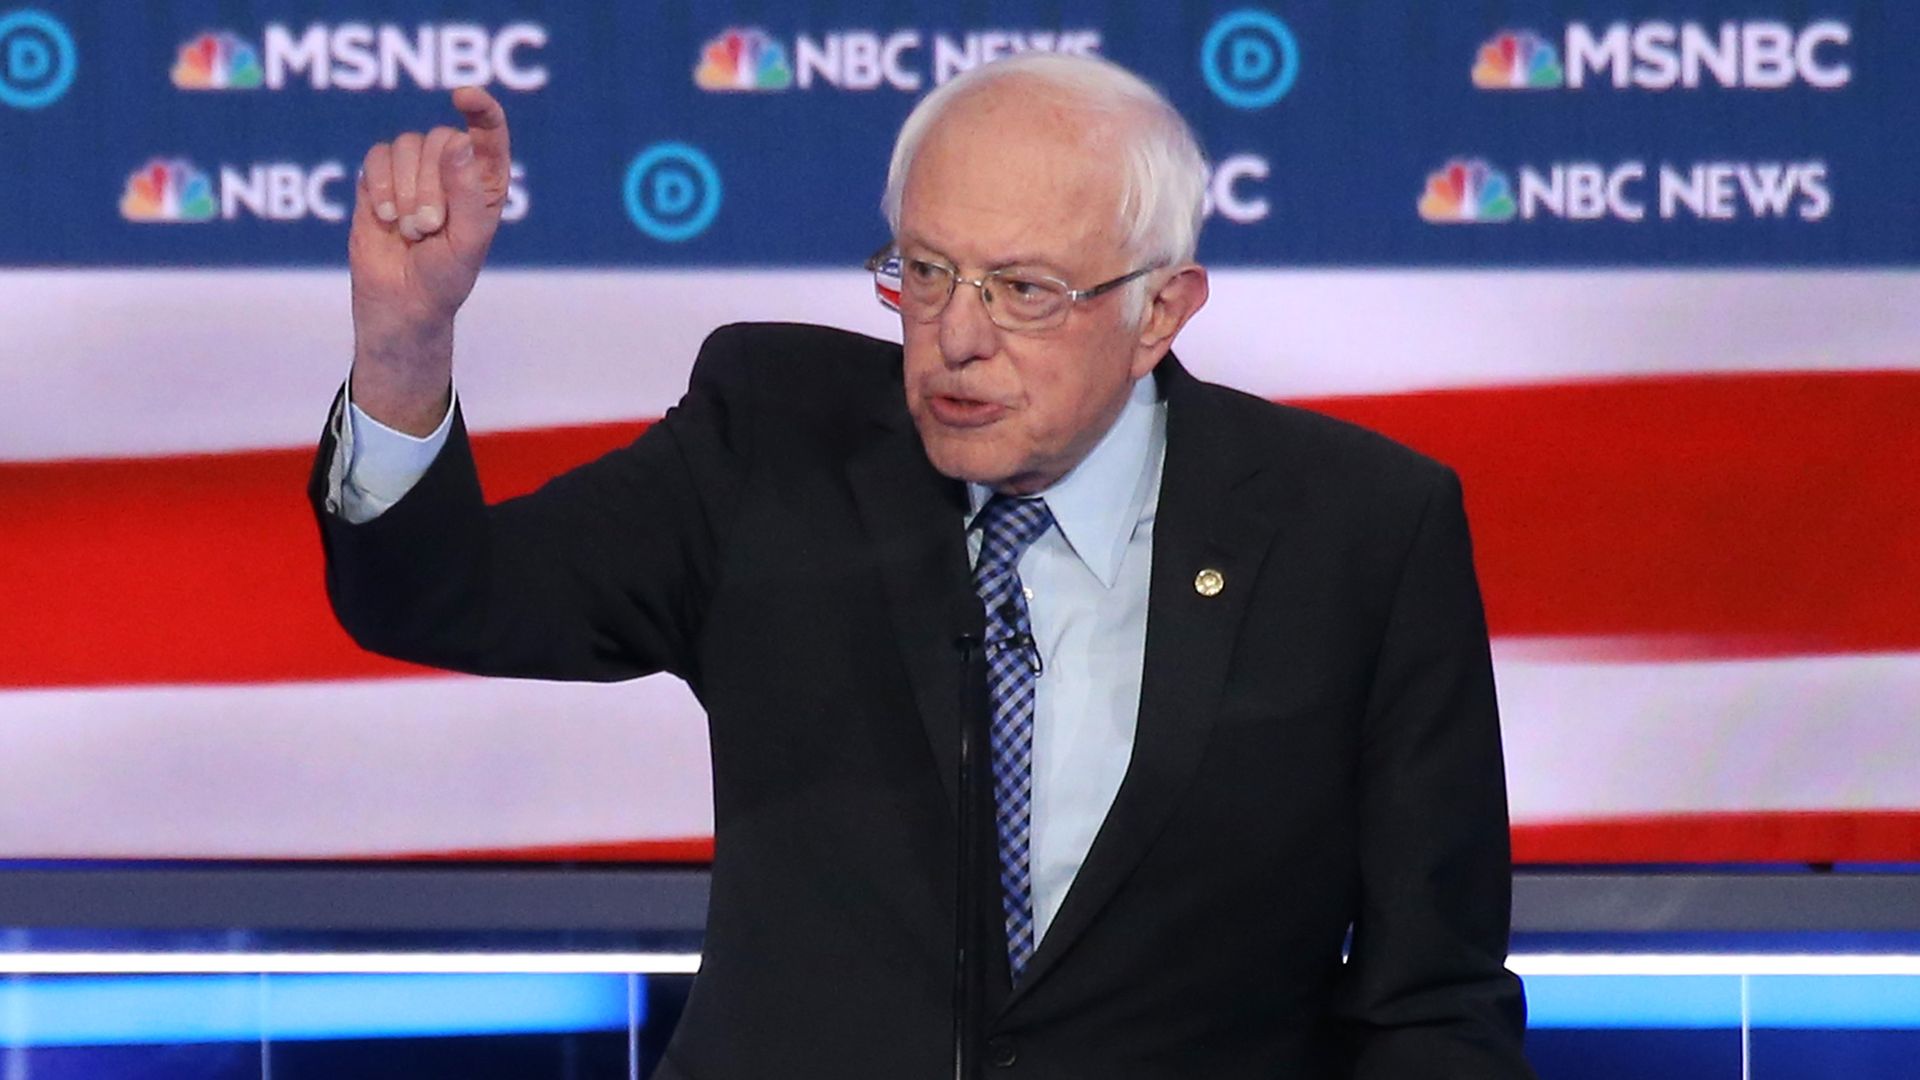 In this image, Sanders stands behind a podium on the debate stage